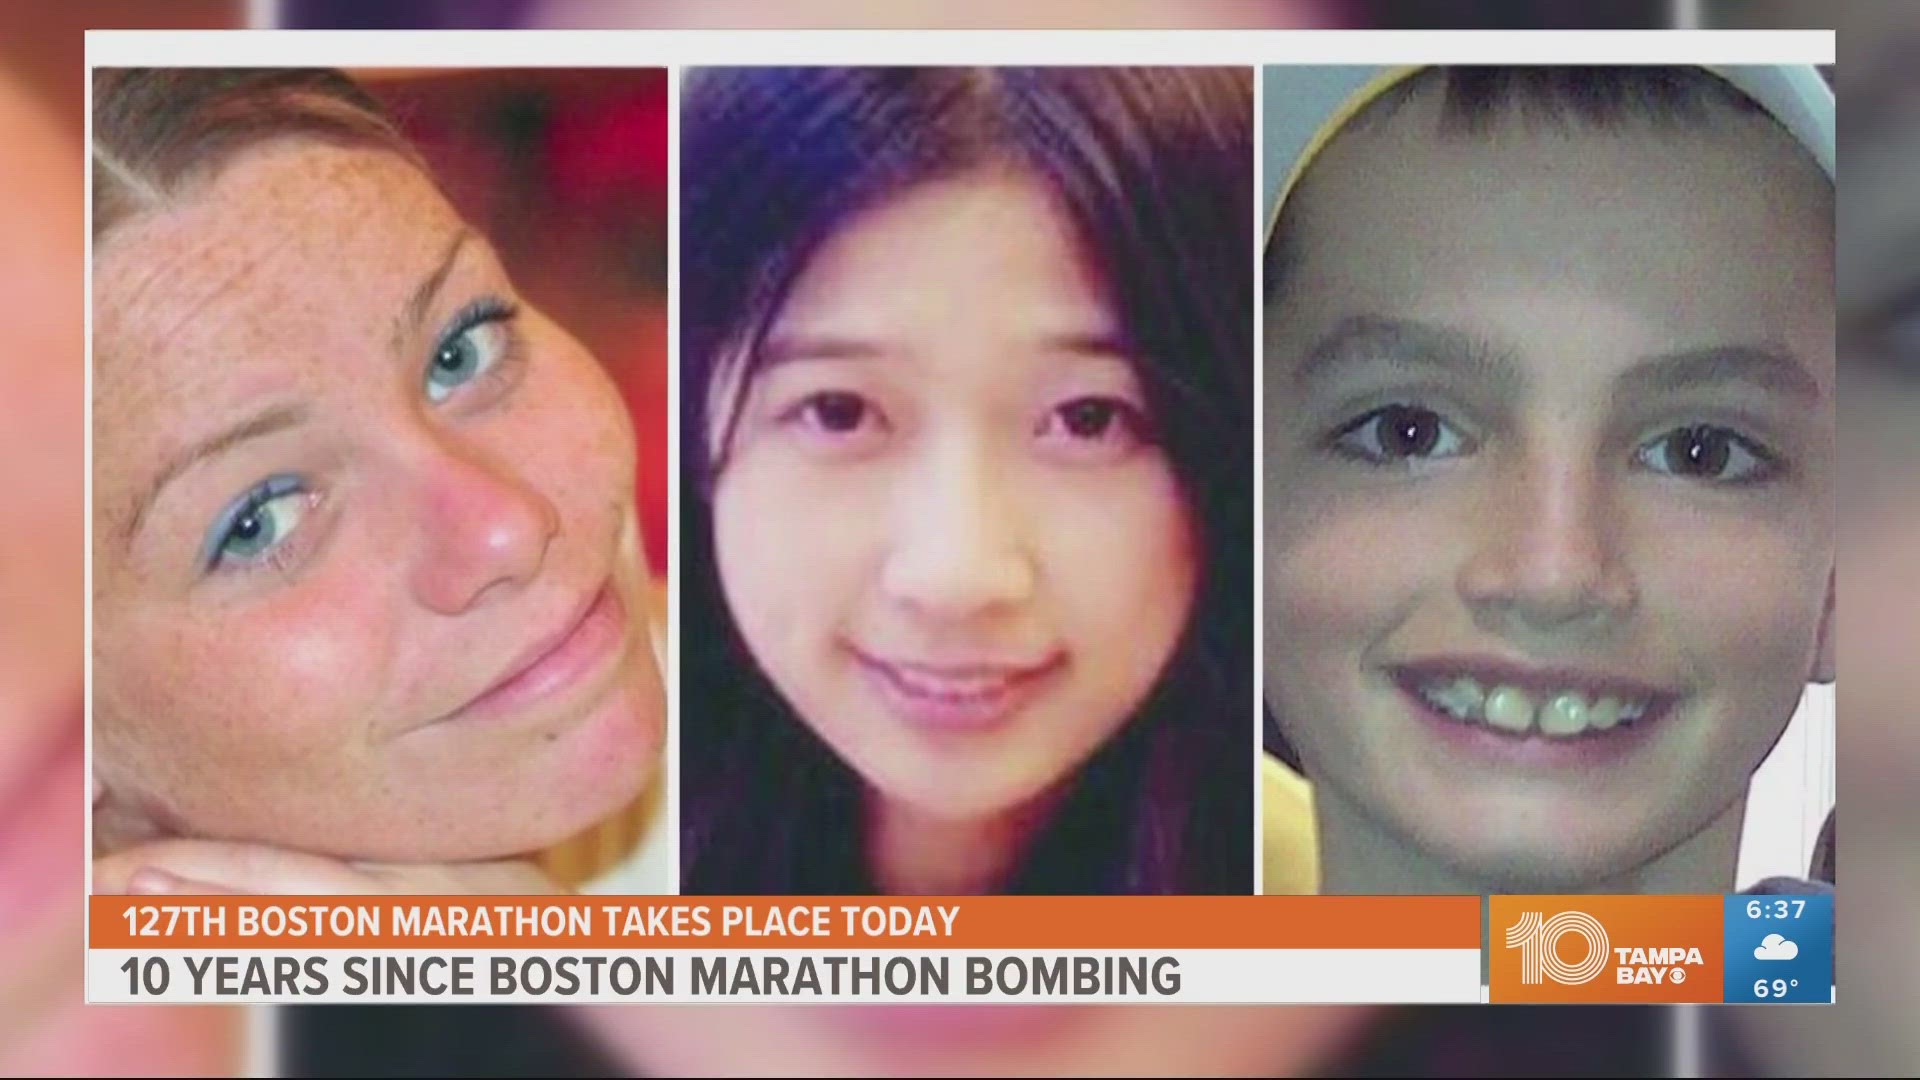 Over the weekend, events commemorating the tragedy took place — when three people were killed and hundreds were hurt. The 127th Boston Marathon takes place Monday.